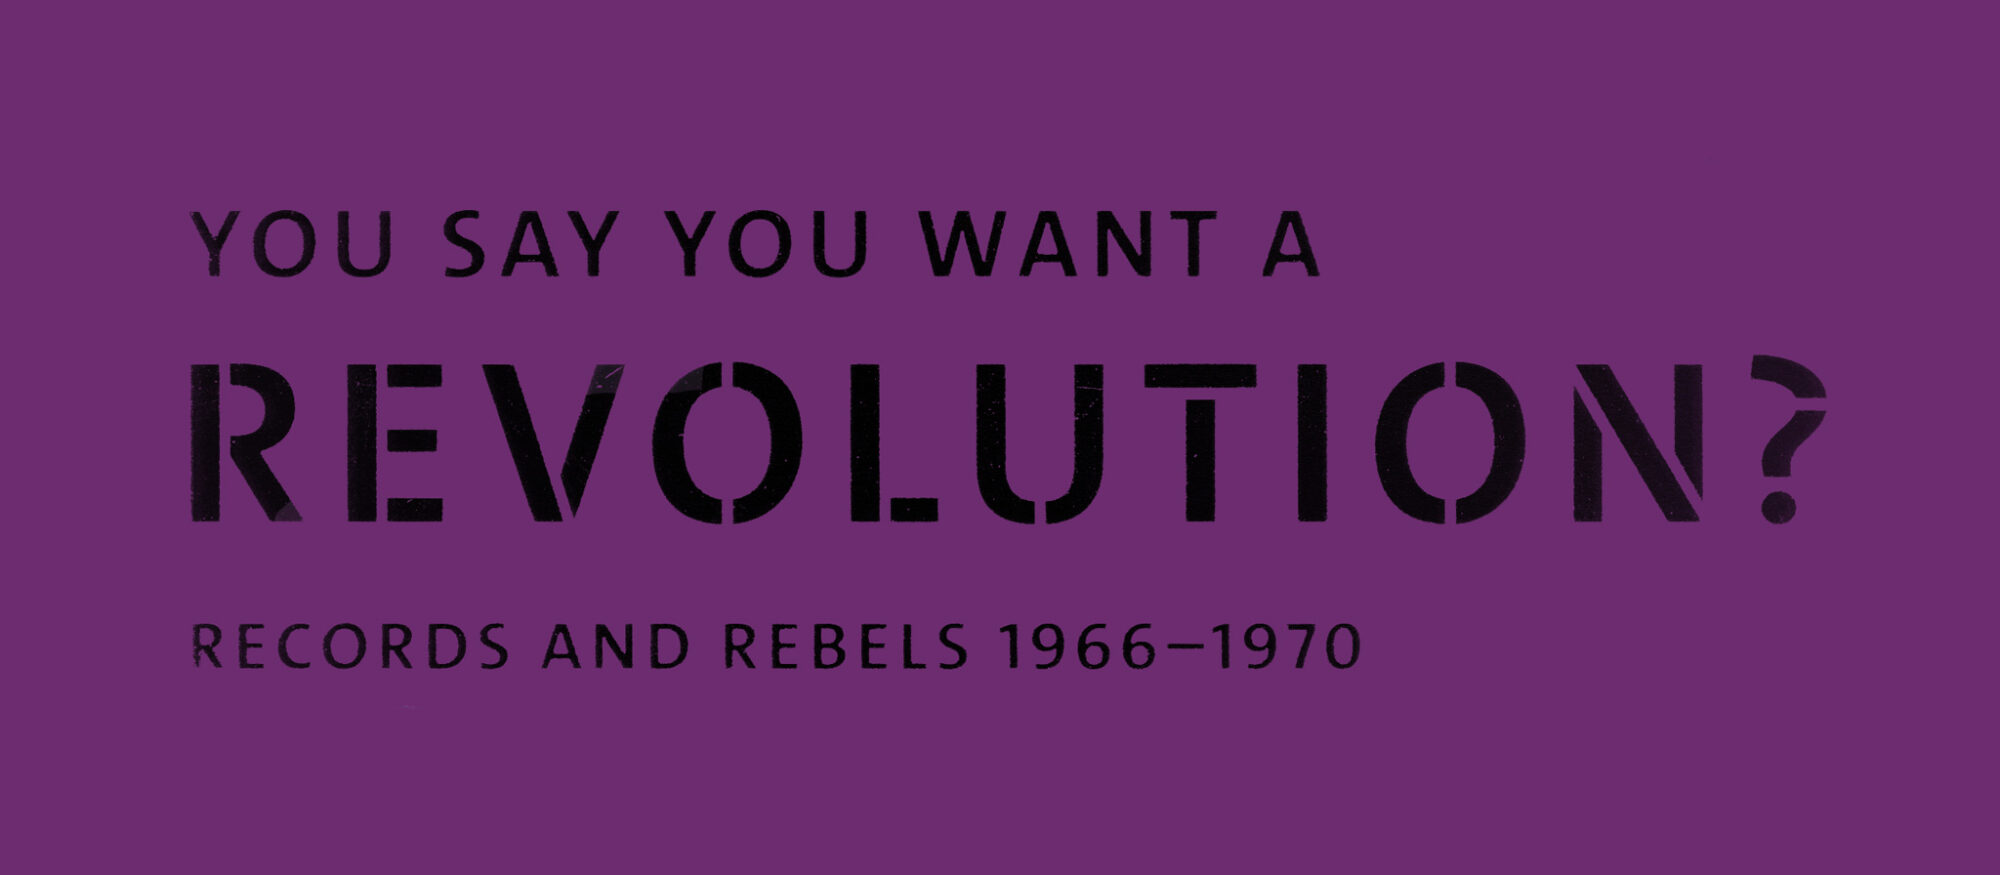 You Say You Want A Revolution?